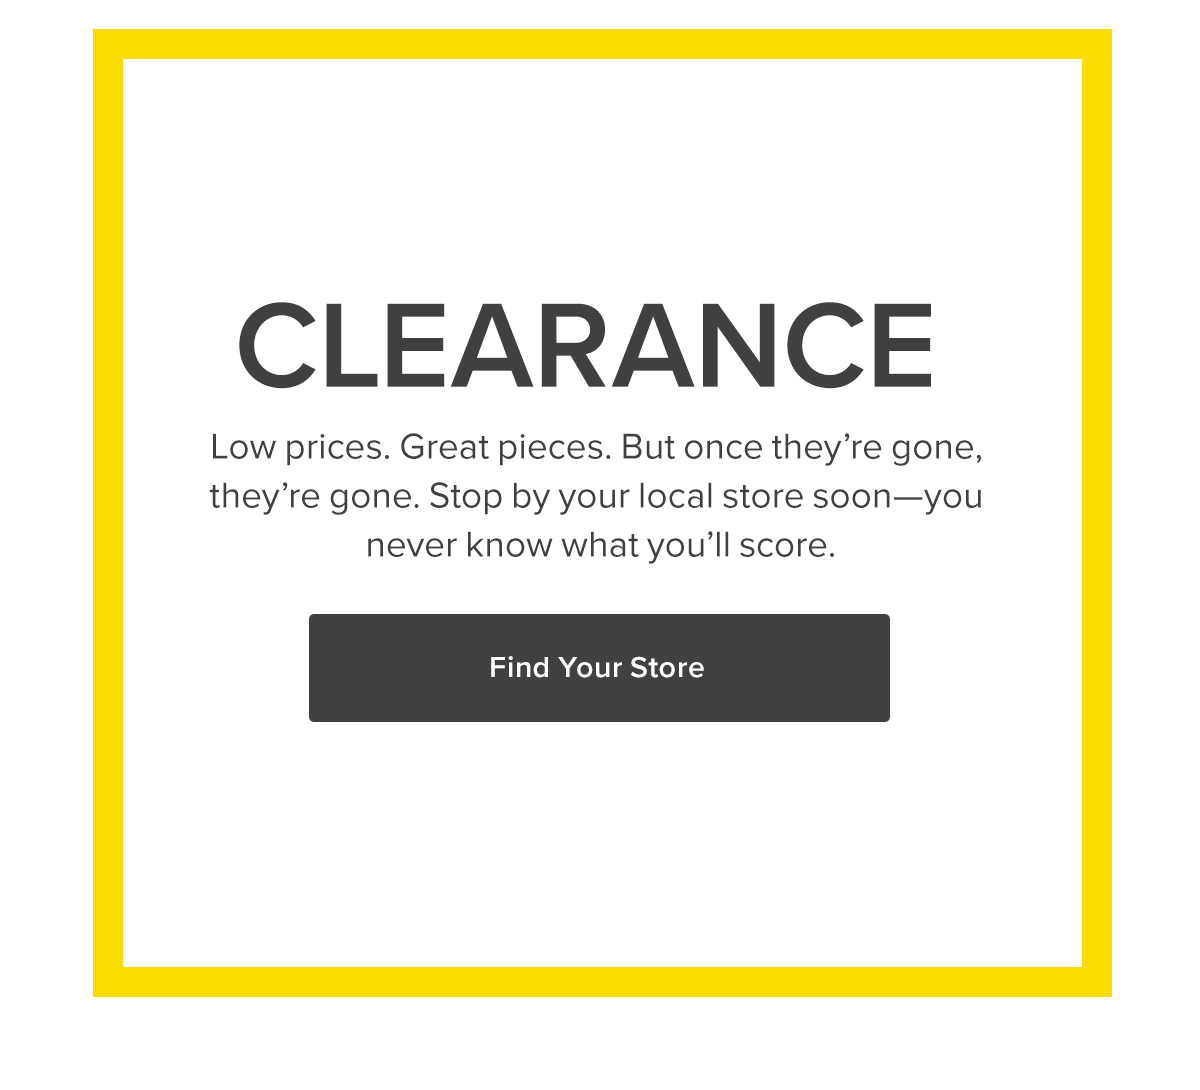 Clearance | Find Your Store